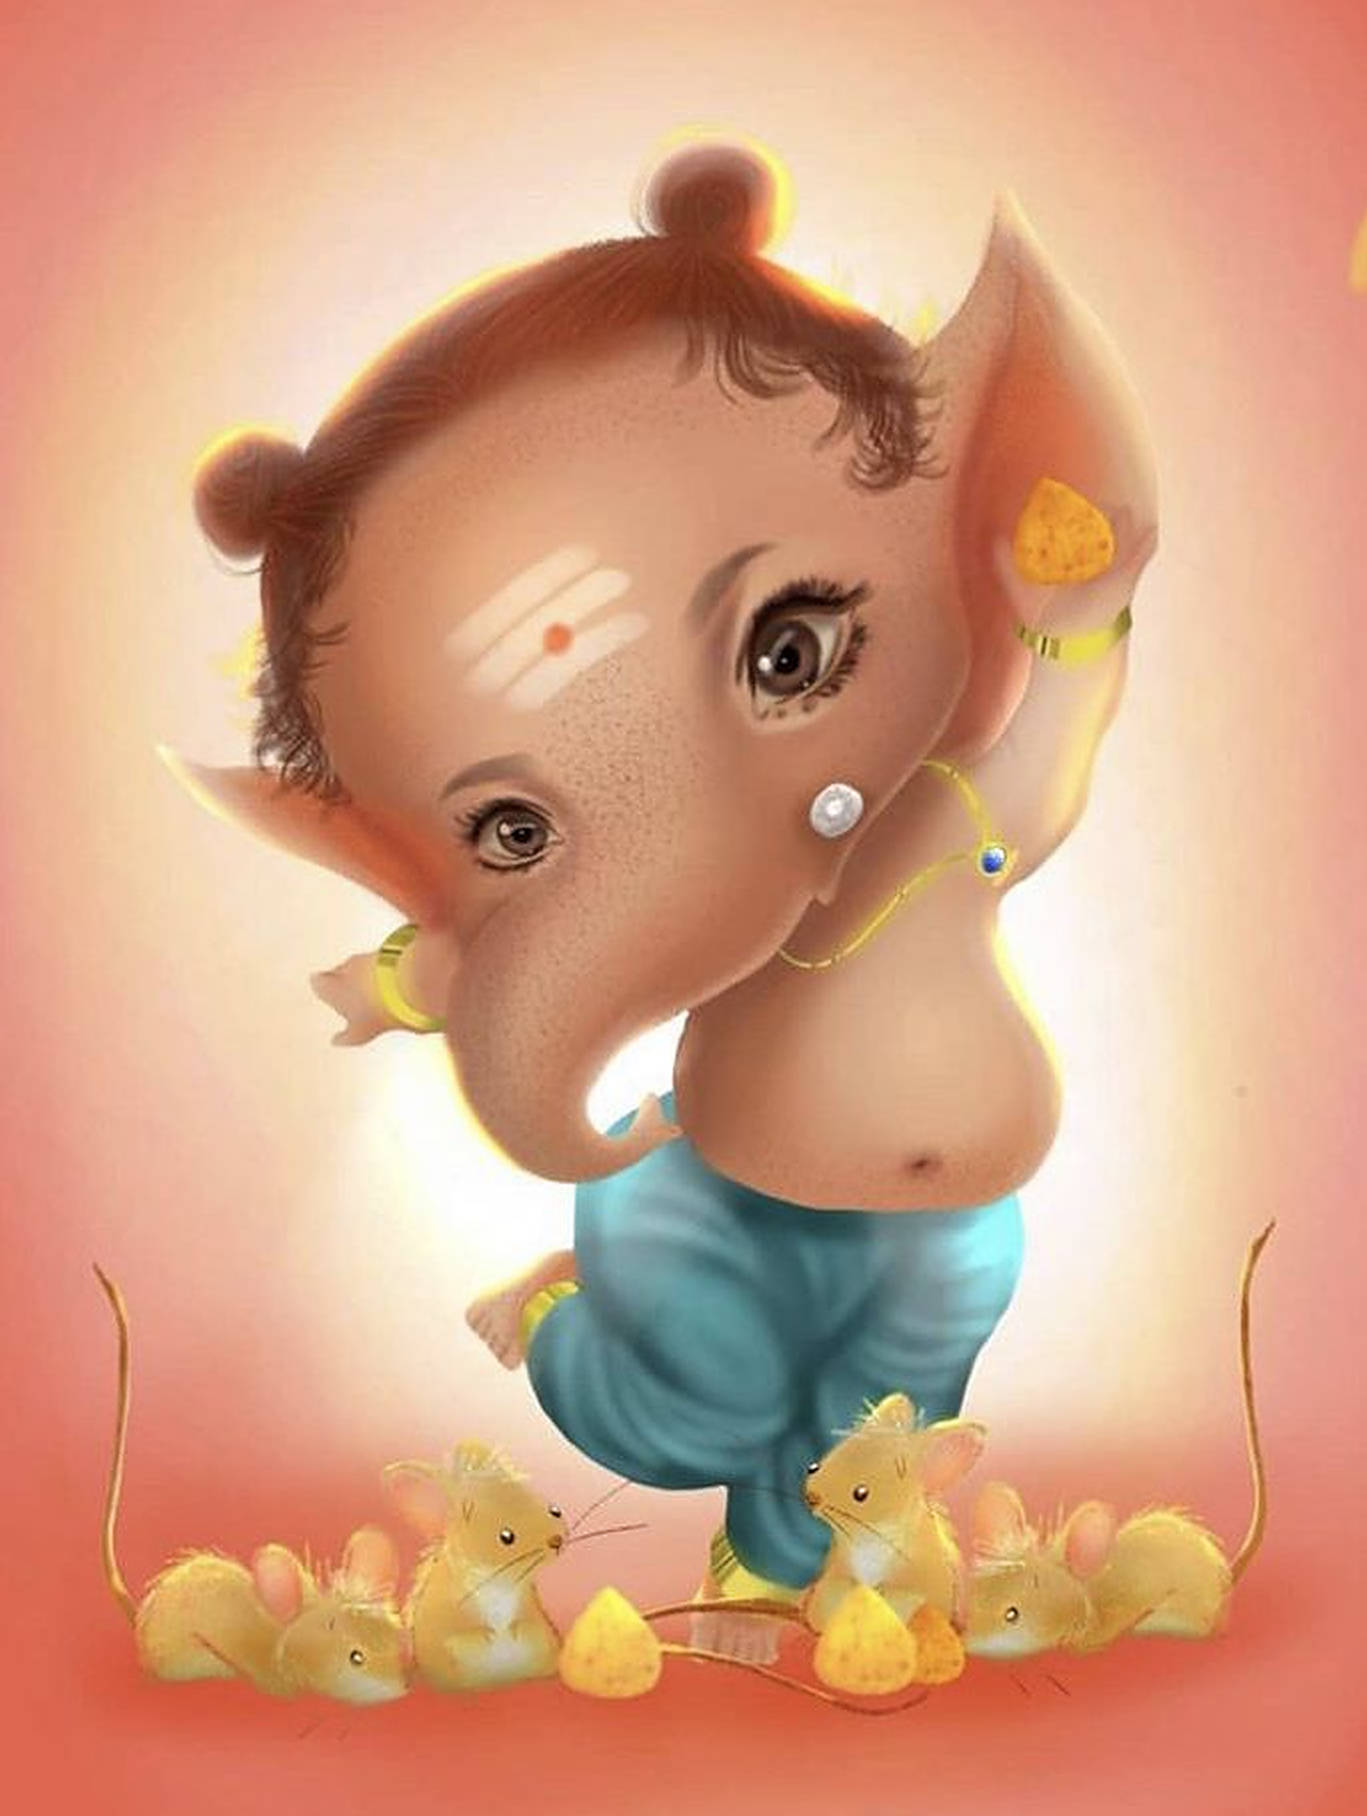 Free Baby Ganesh Wallpaper Downloads, [100+] Baby Ganesh Wallpapers for  FREE 